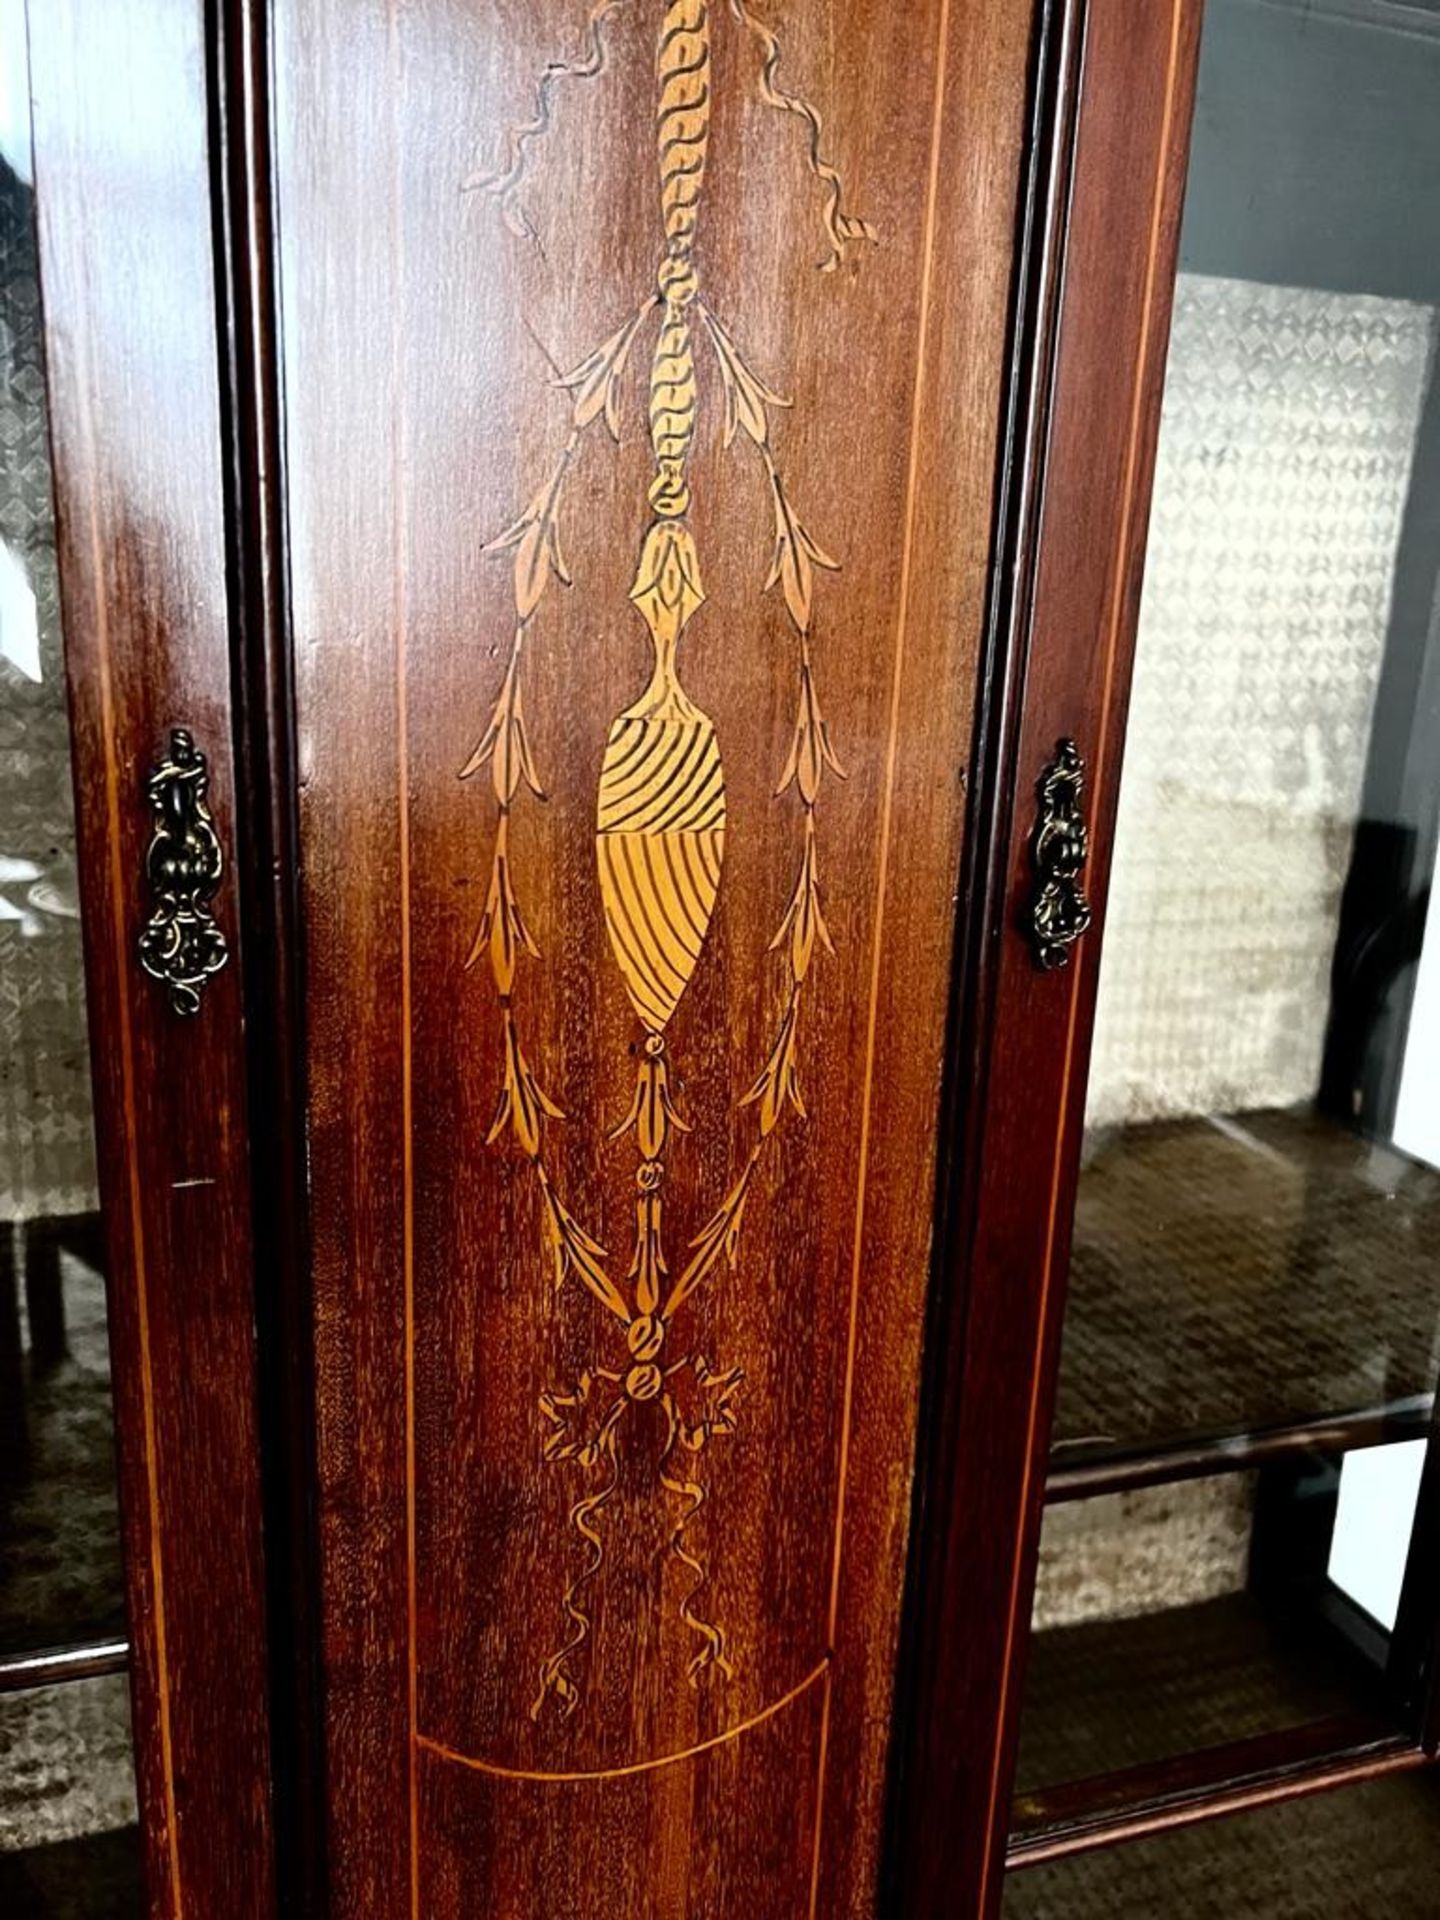 POLISHED MAHOGANY CHINA DISPLAY CABINET WITH INLAID CENTRE PANEL, APPROX 160cm HIGH, 112cm LONG - Image 2 of 2